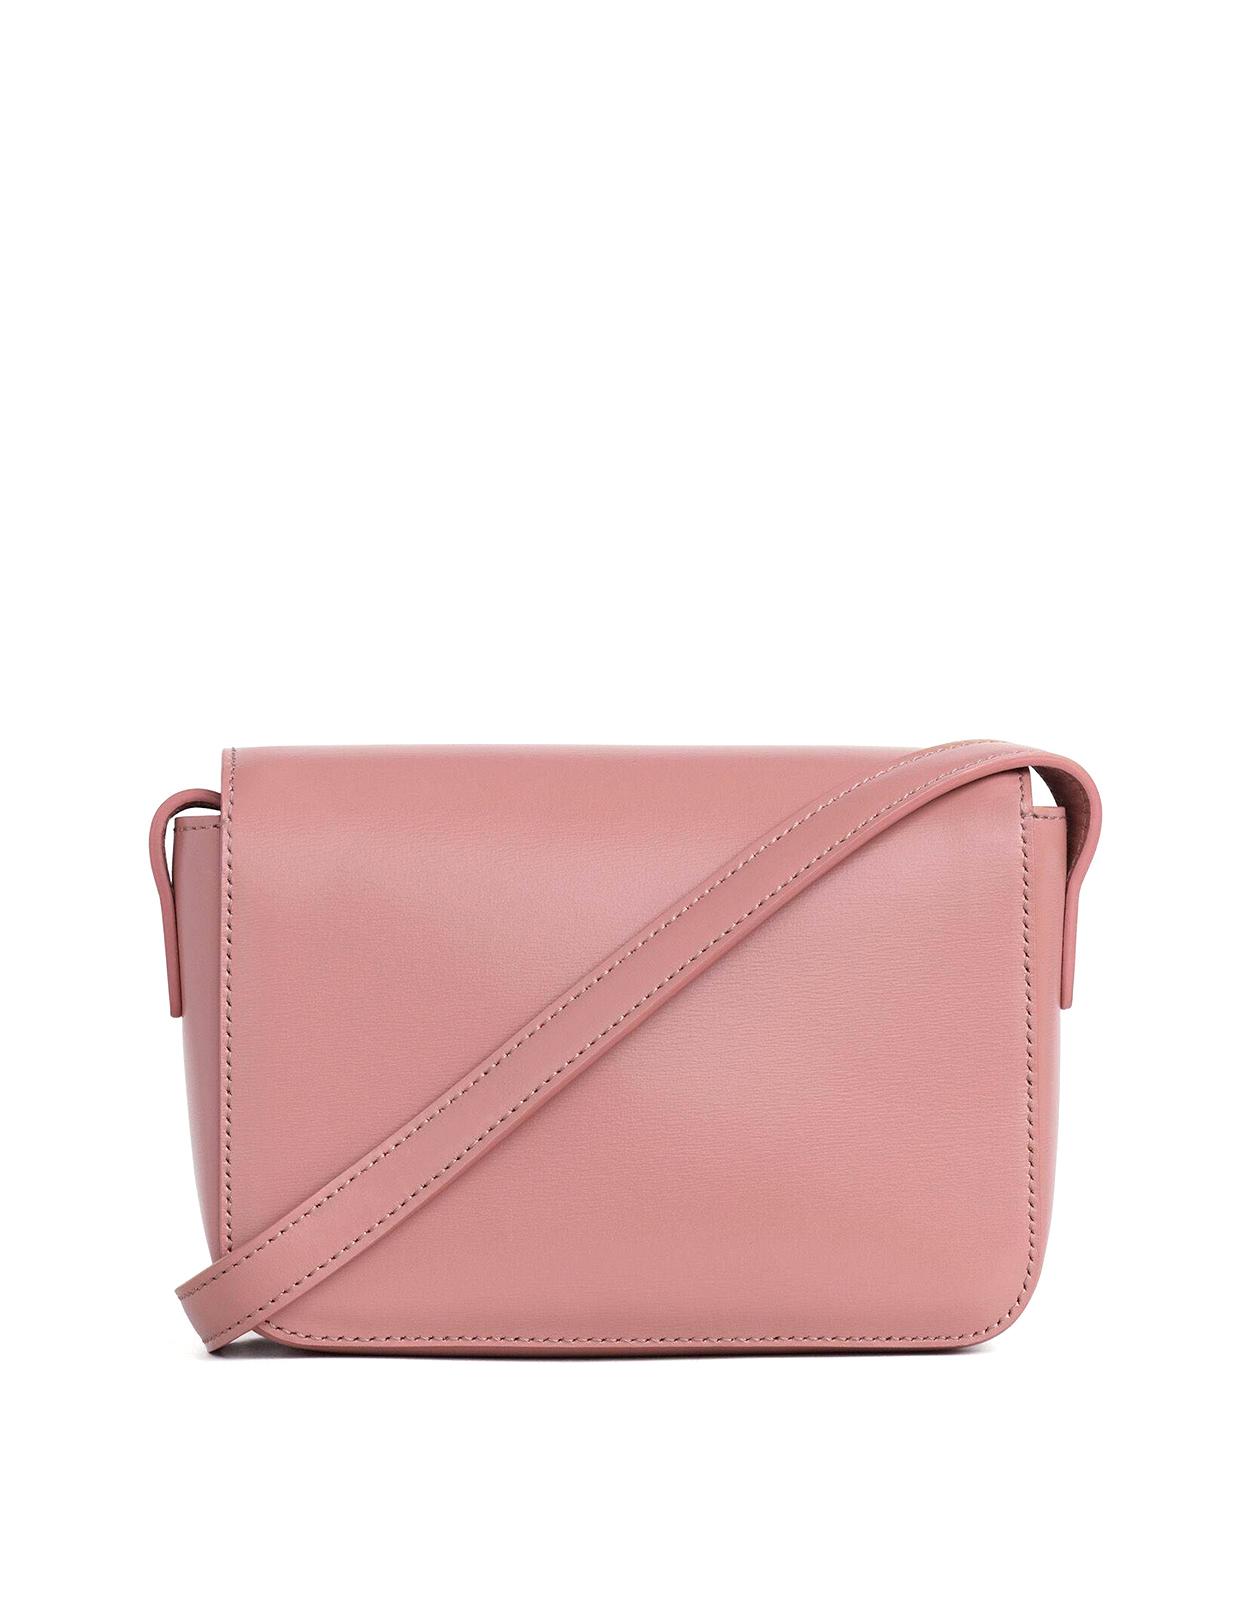 Celine Leather Nano Triomphe Bag In Shiny Calfskin in Pink - Lyst